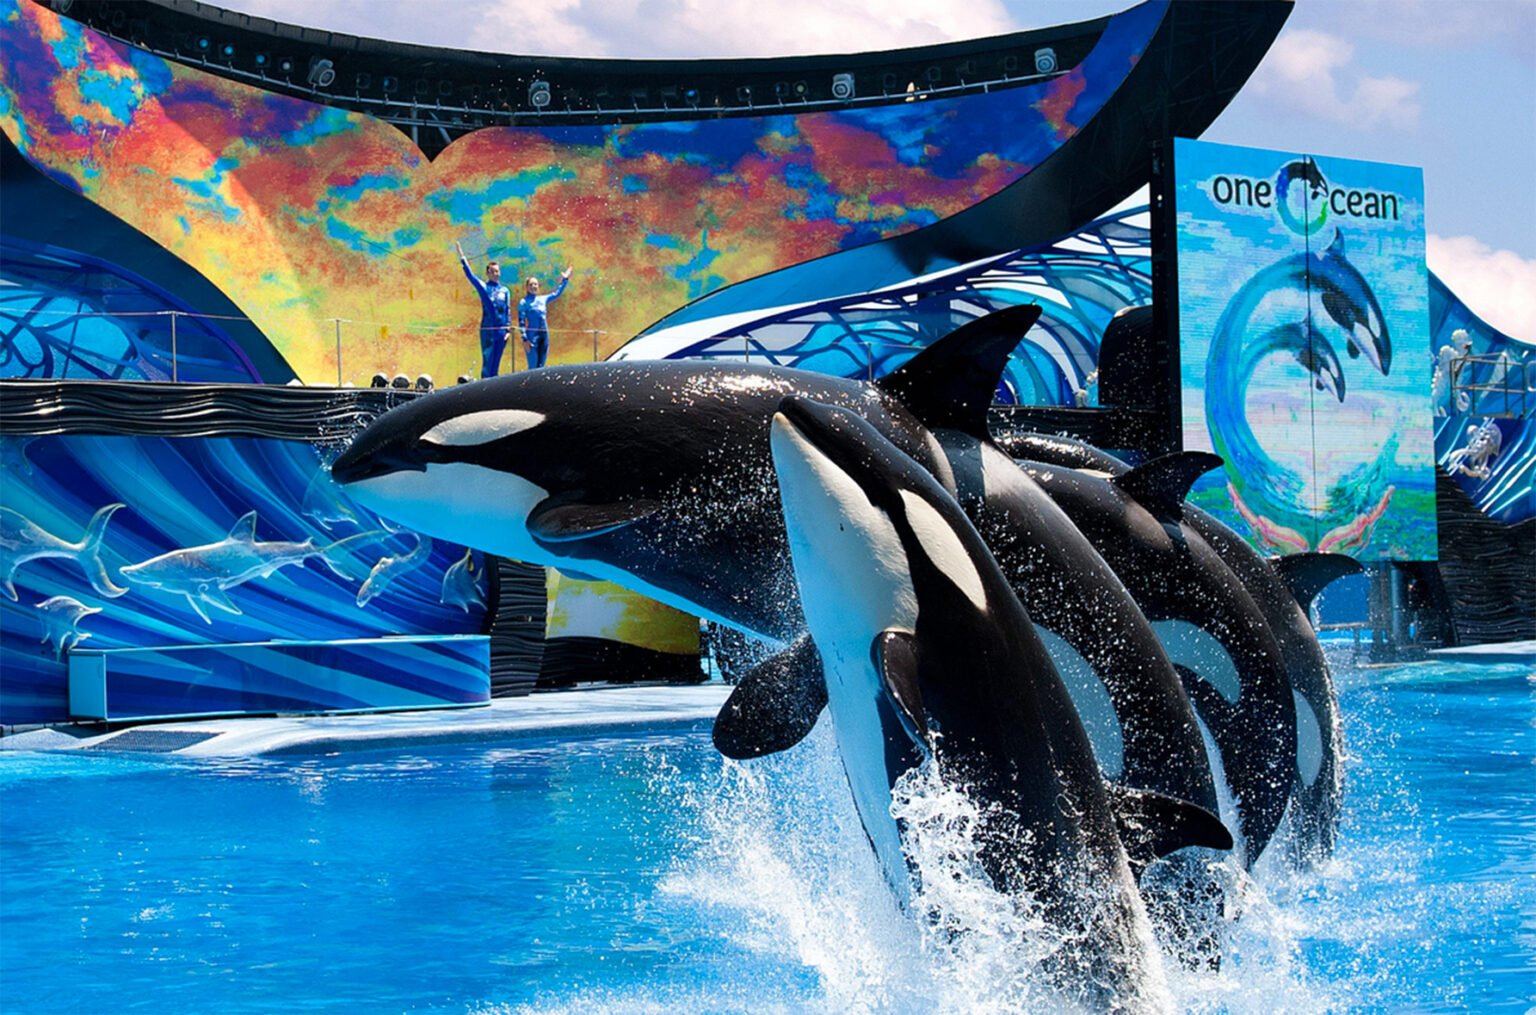 SeaWorld is offering FREE admission for U. S. military veterans and